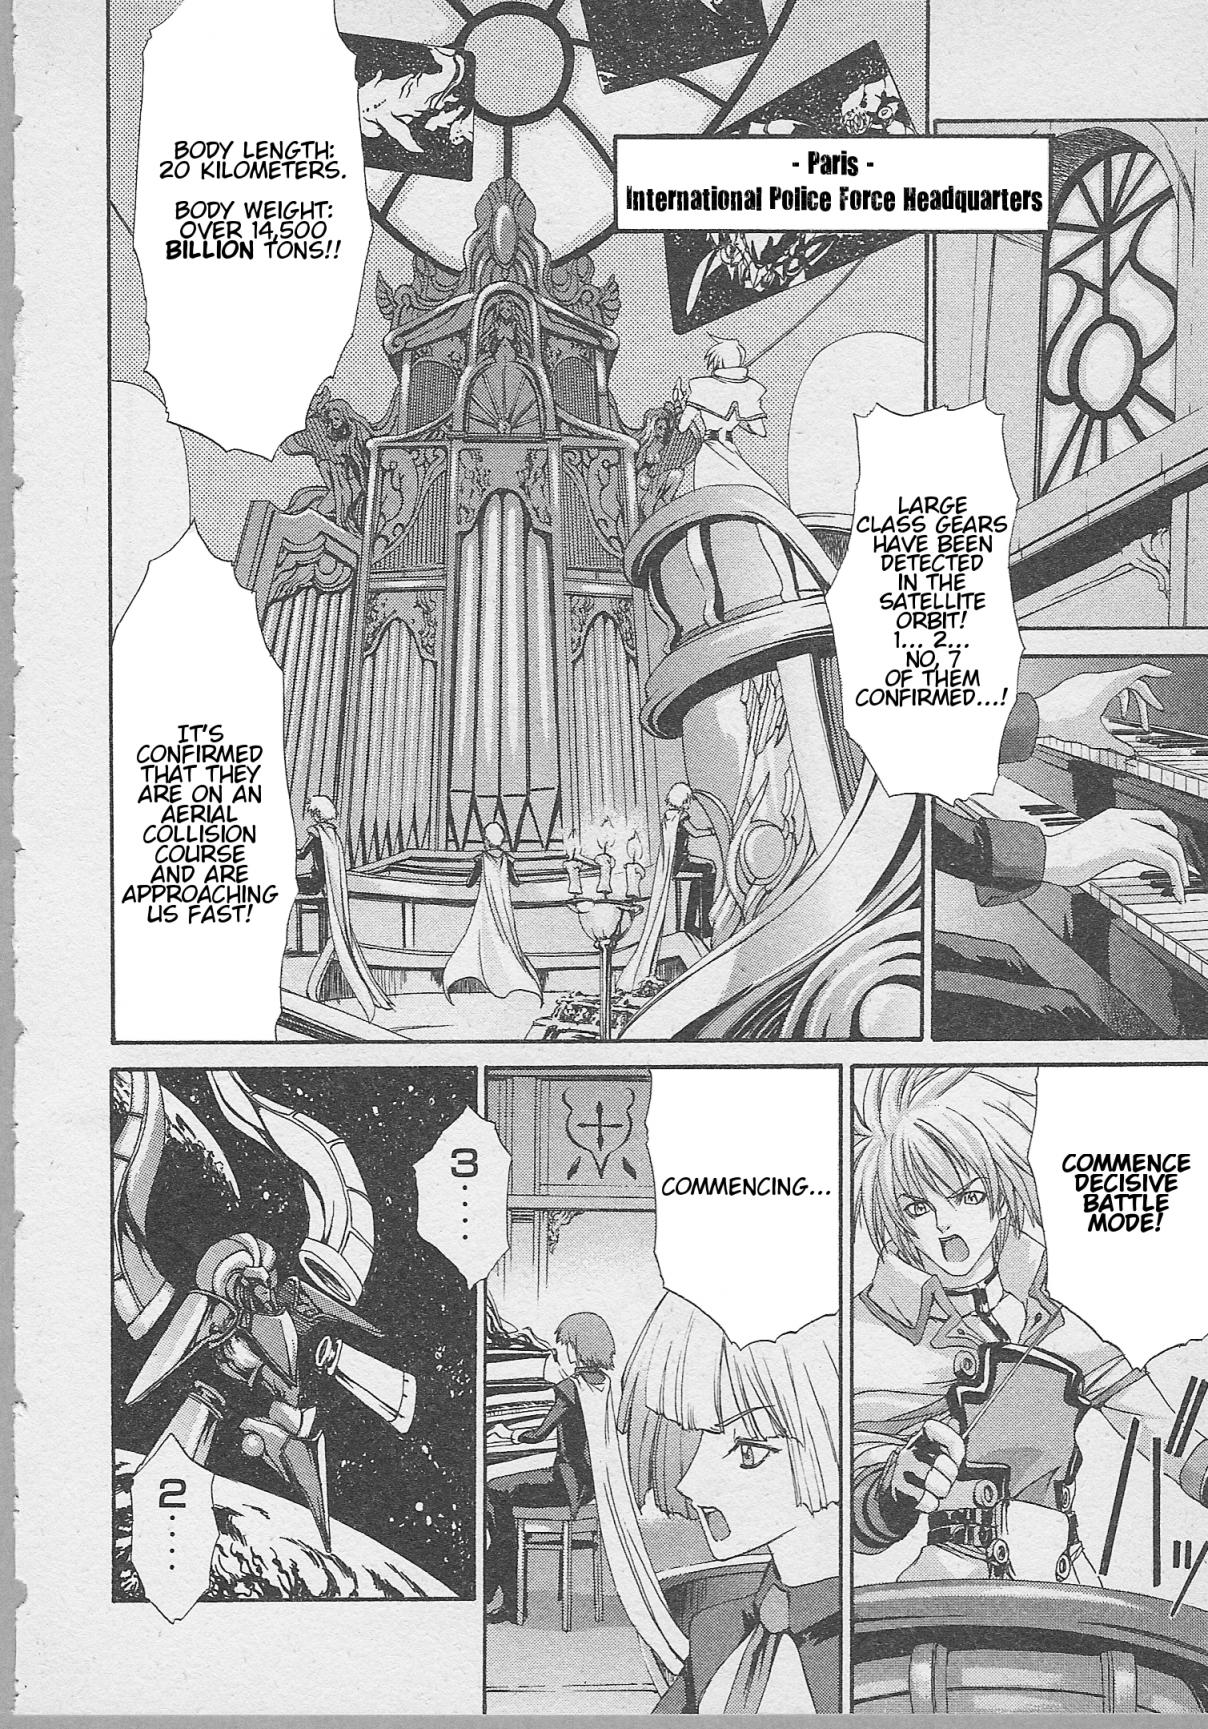 Guilty Gear Xtra Vol. 1 Ch. 8 The Ship That Floats Among the Stars and the Metallic Island That Flies in the Sky